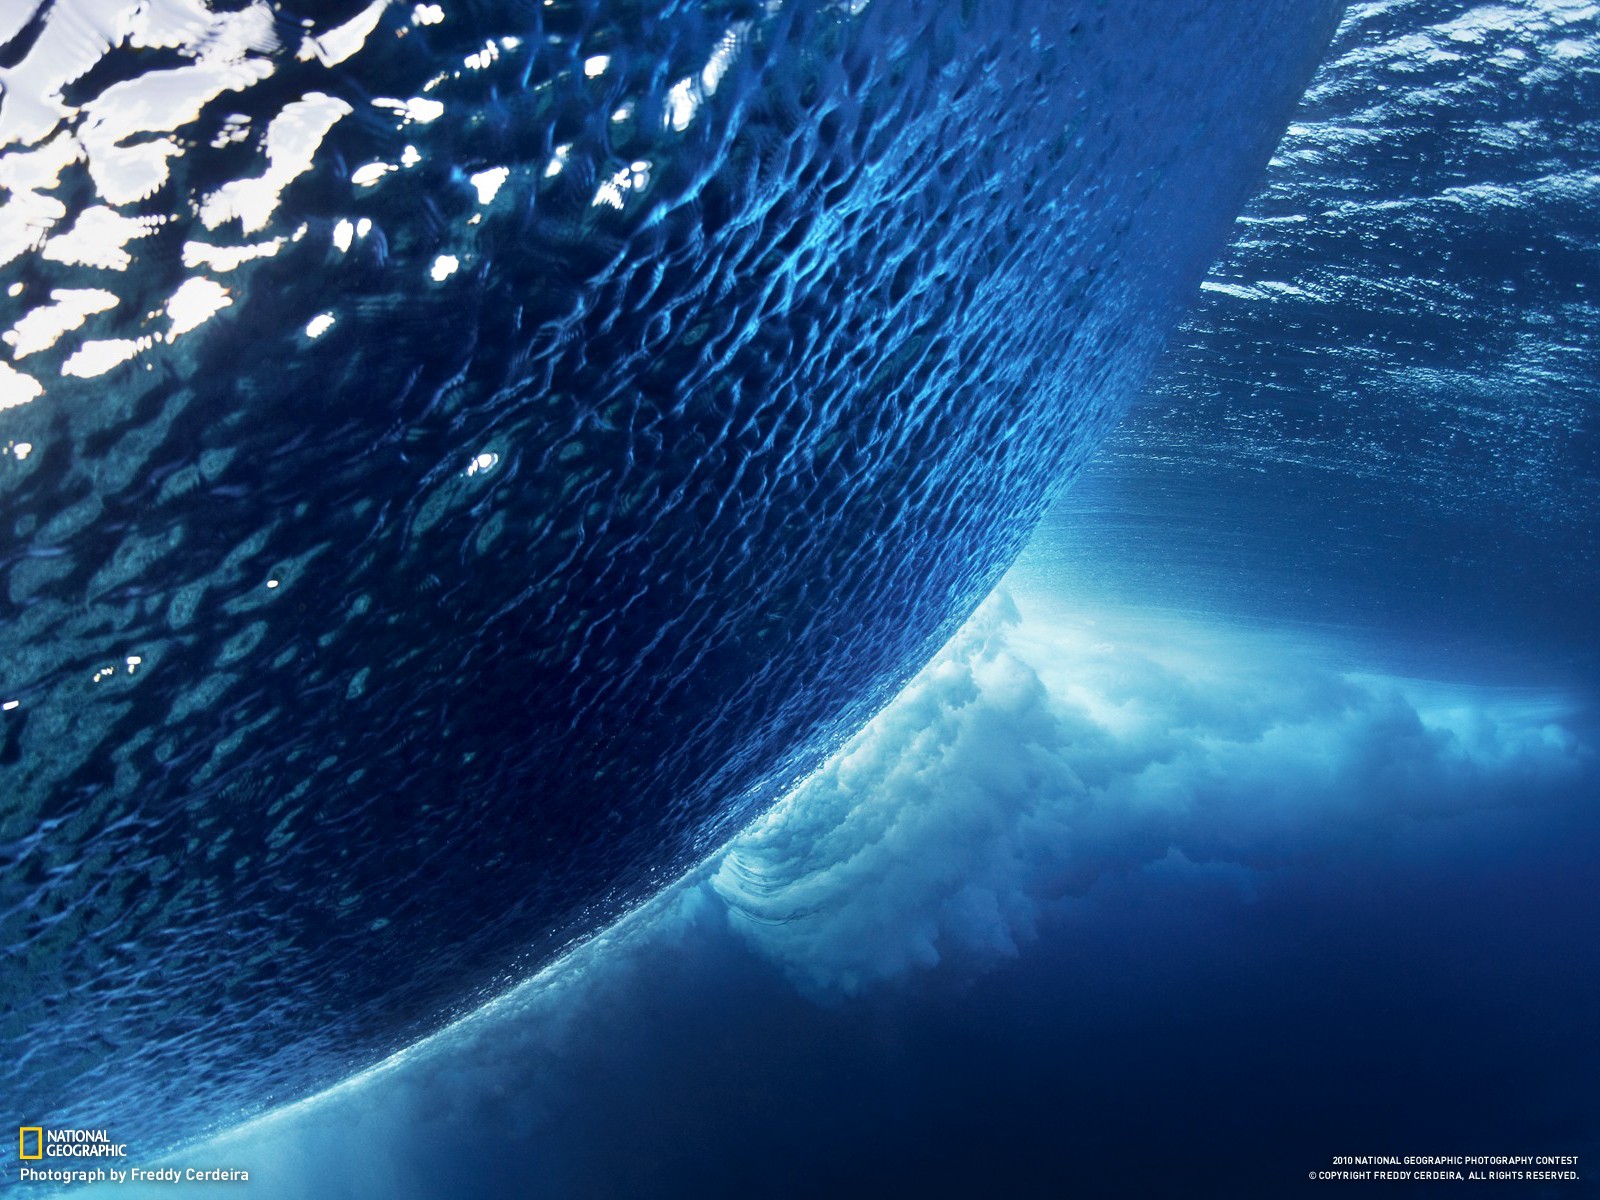 General 1600x1200 underwater waves National Geographic blue water 2010 (Year) nature